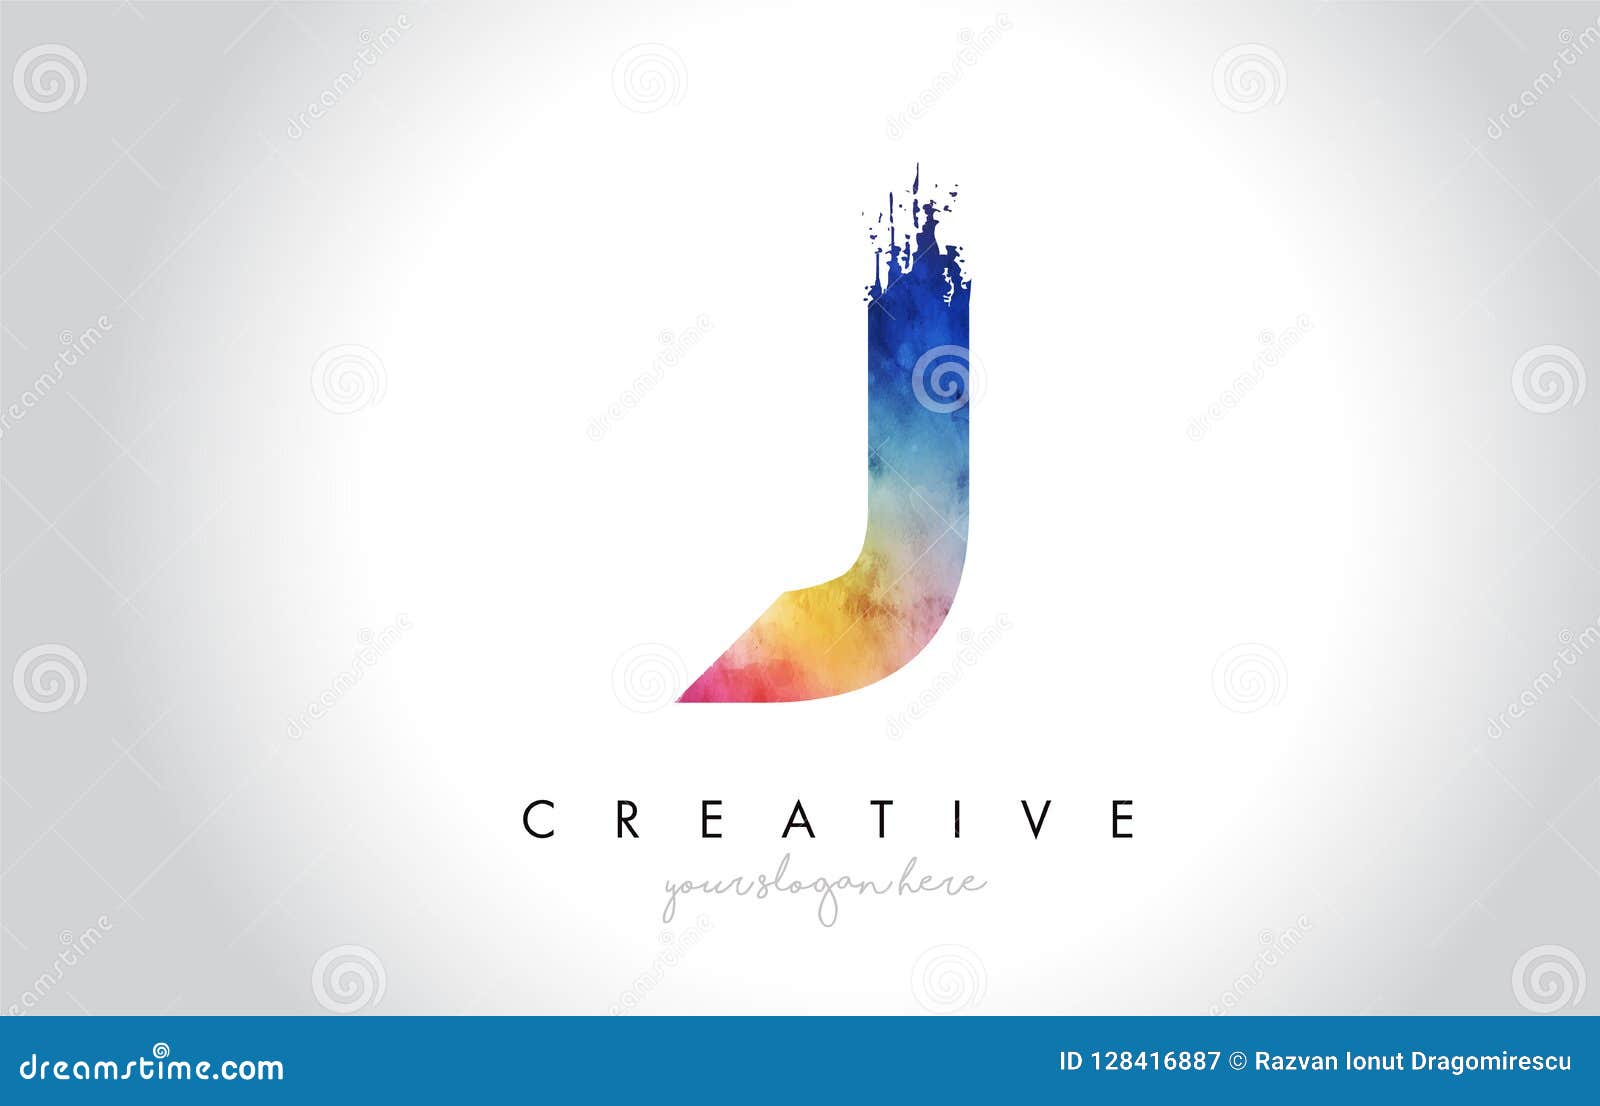 J Paintbrush Letter Design With Watercolor Brush Stroke And Mode Stock Vector Illustration Of Symbol Artistic